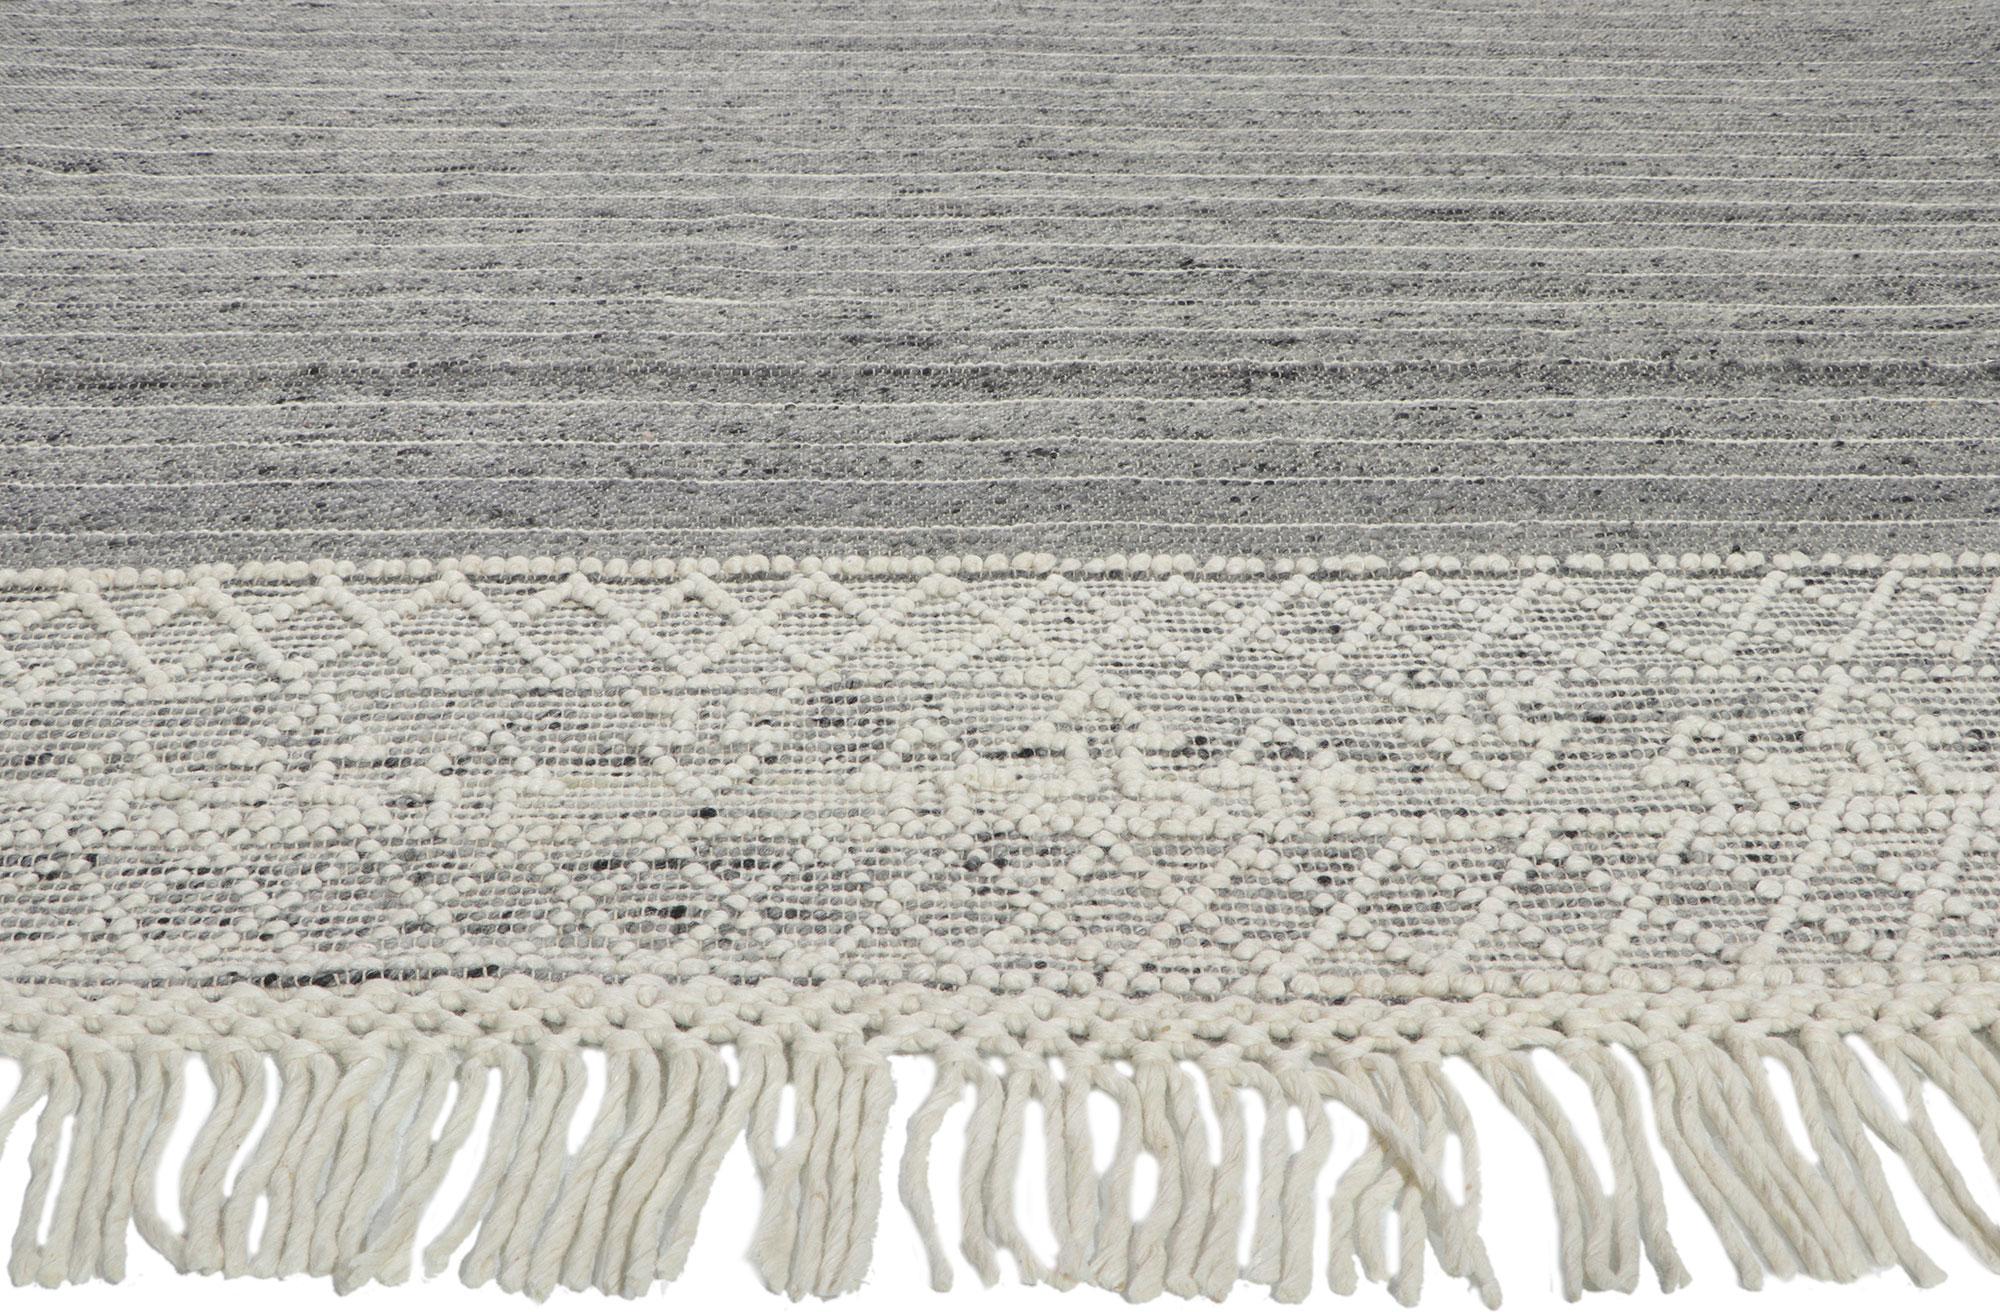 Hand-Woven New Handwoven Textured Jute Rug For Sale